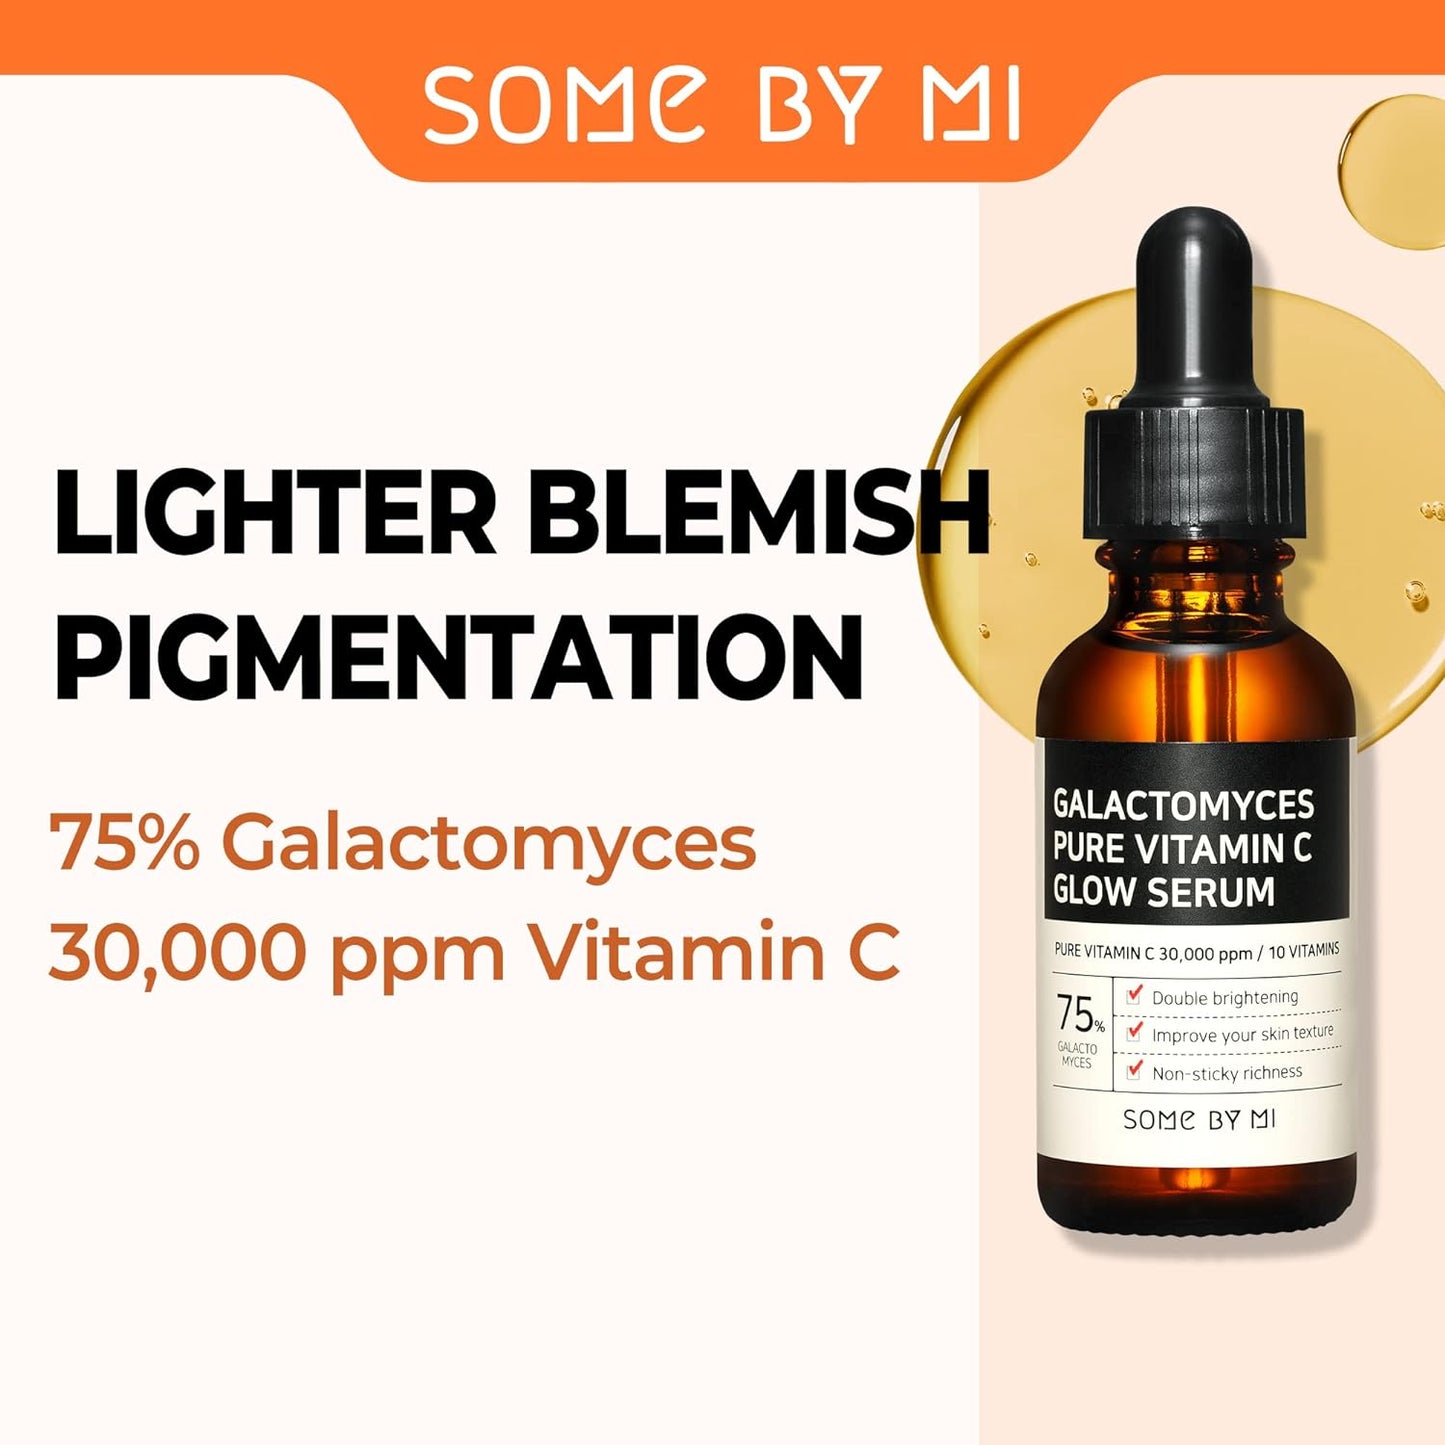 Load image into Gallery viewer, Some By Mi Galactomyces Pure Vitamin C Glow Serum 30ml
